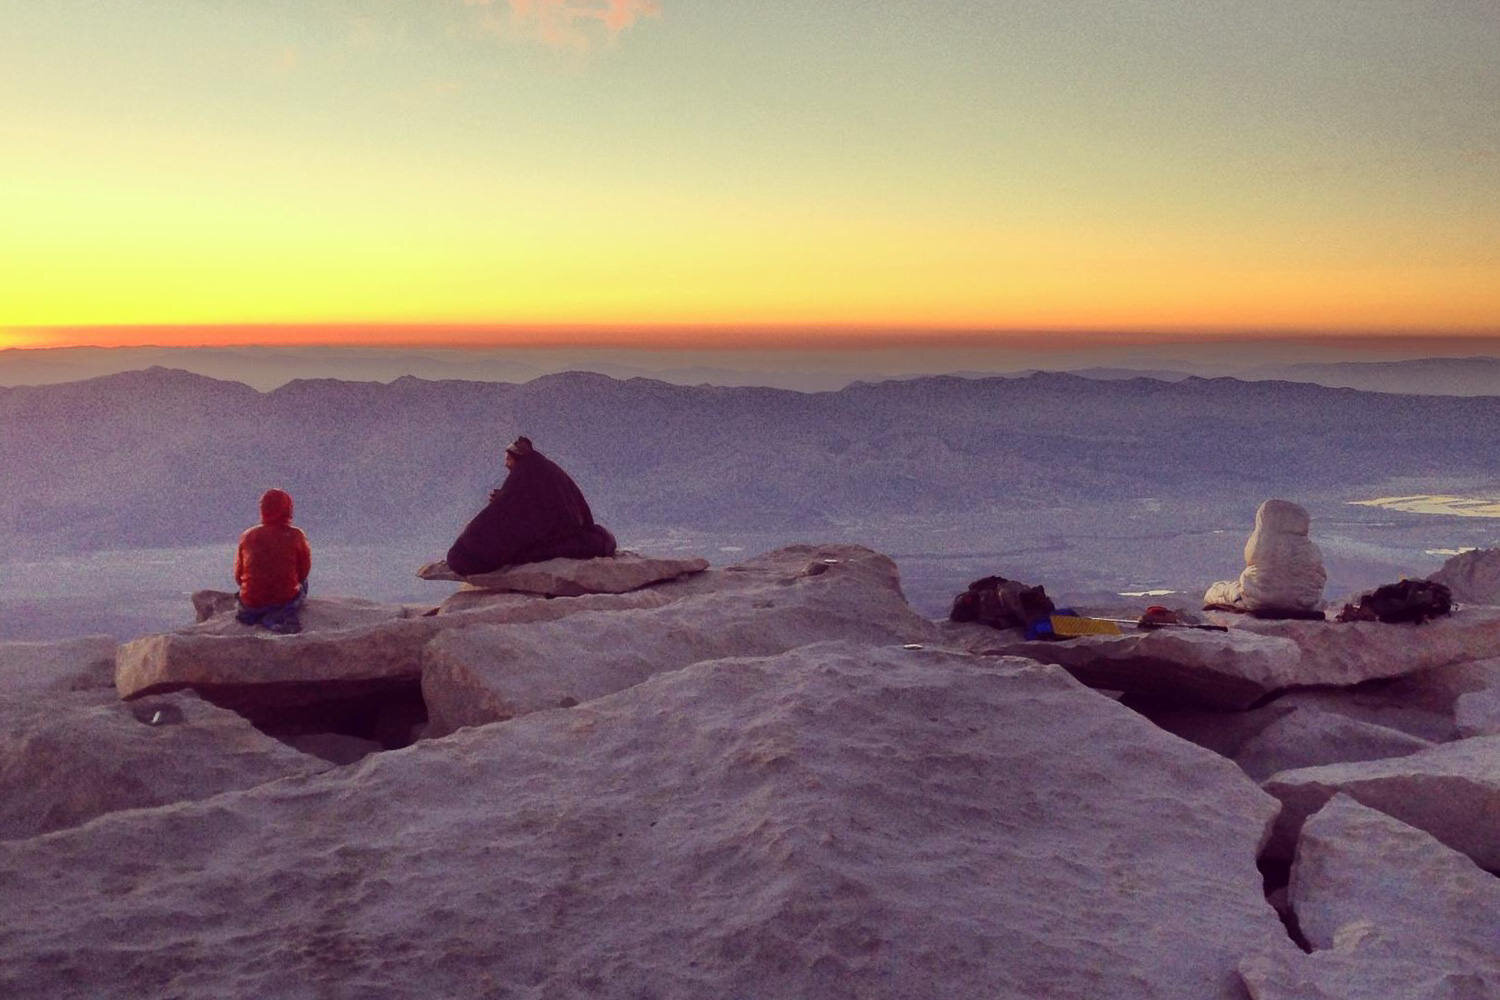 Hikers “wear” their sleeping bags to watch the sunrise at the summit of Mt. Whitney